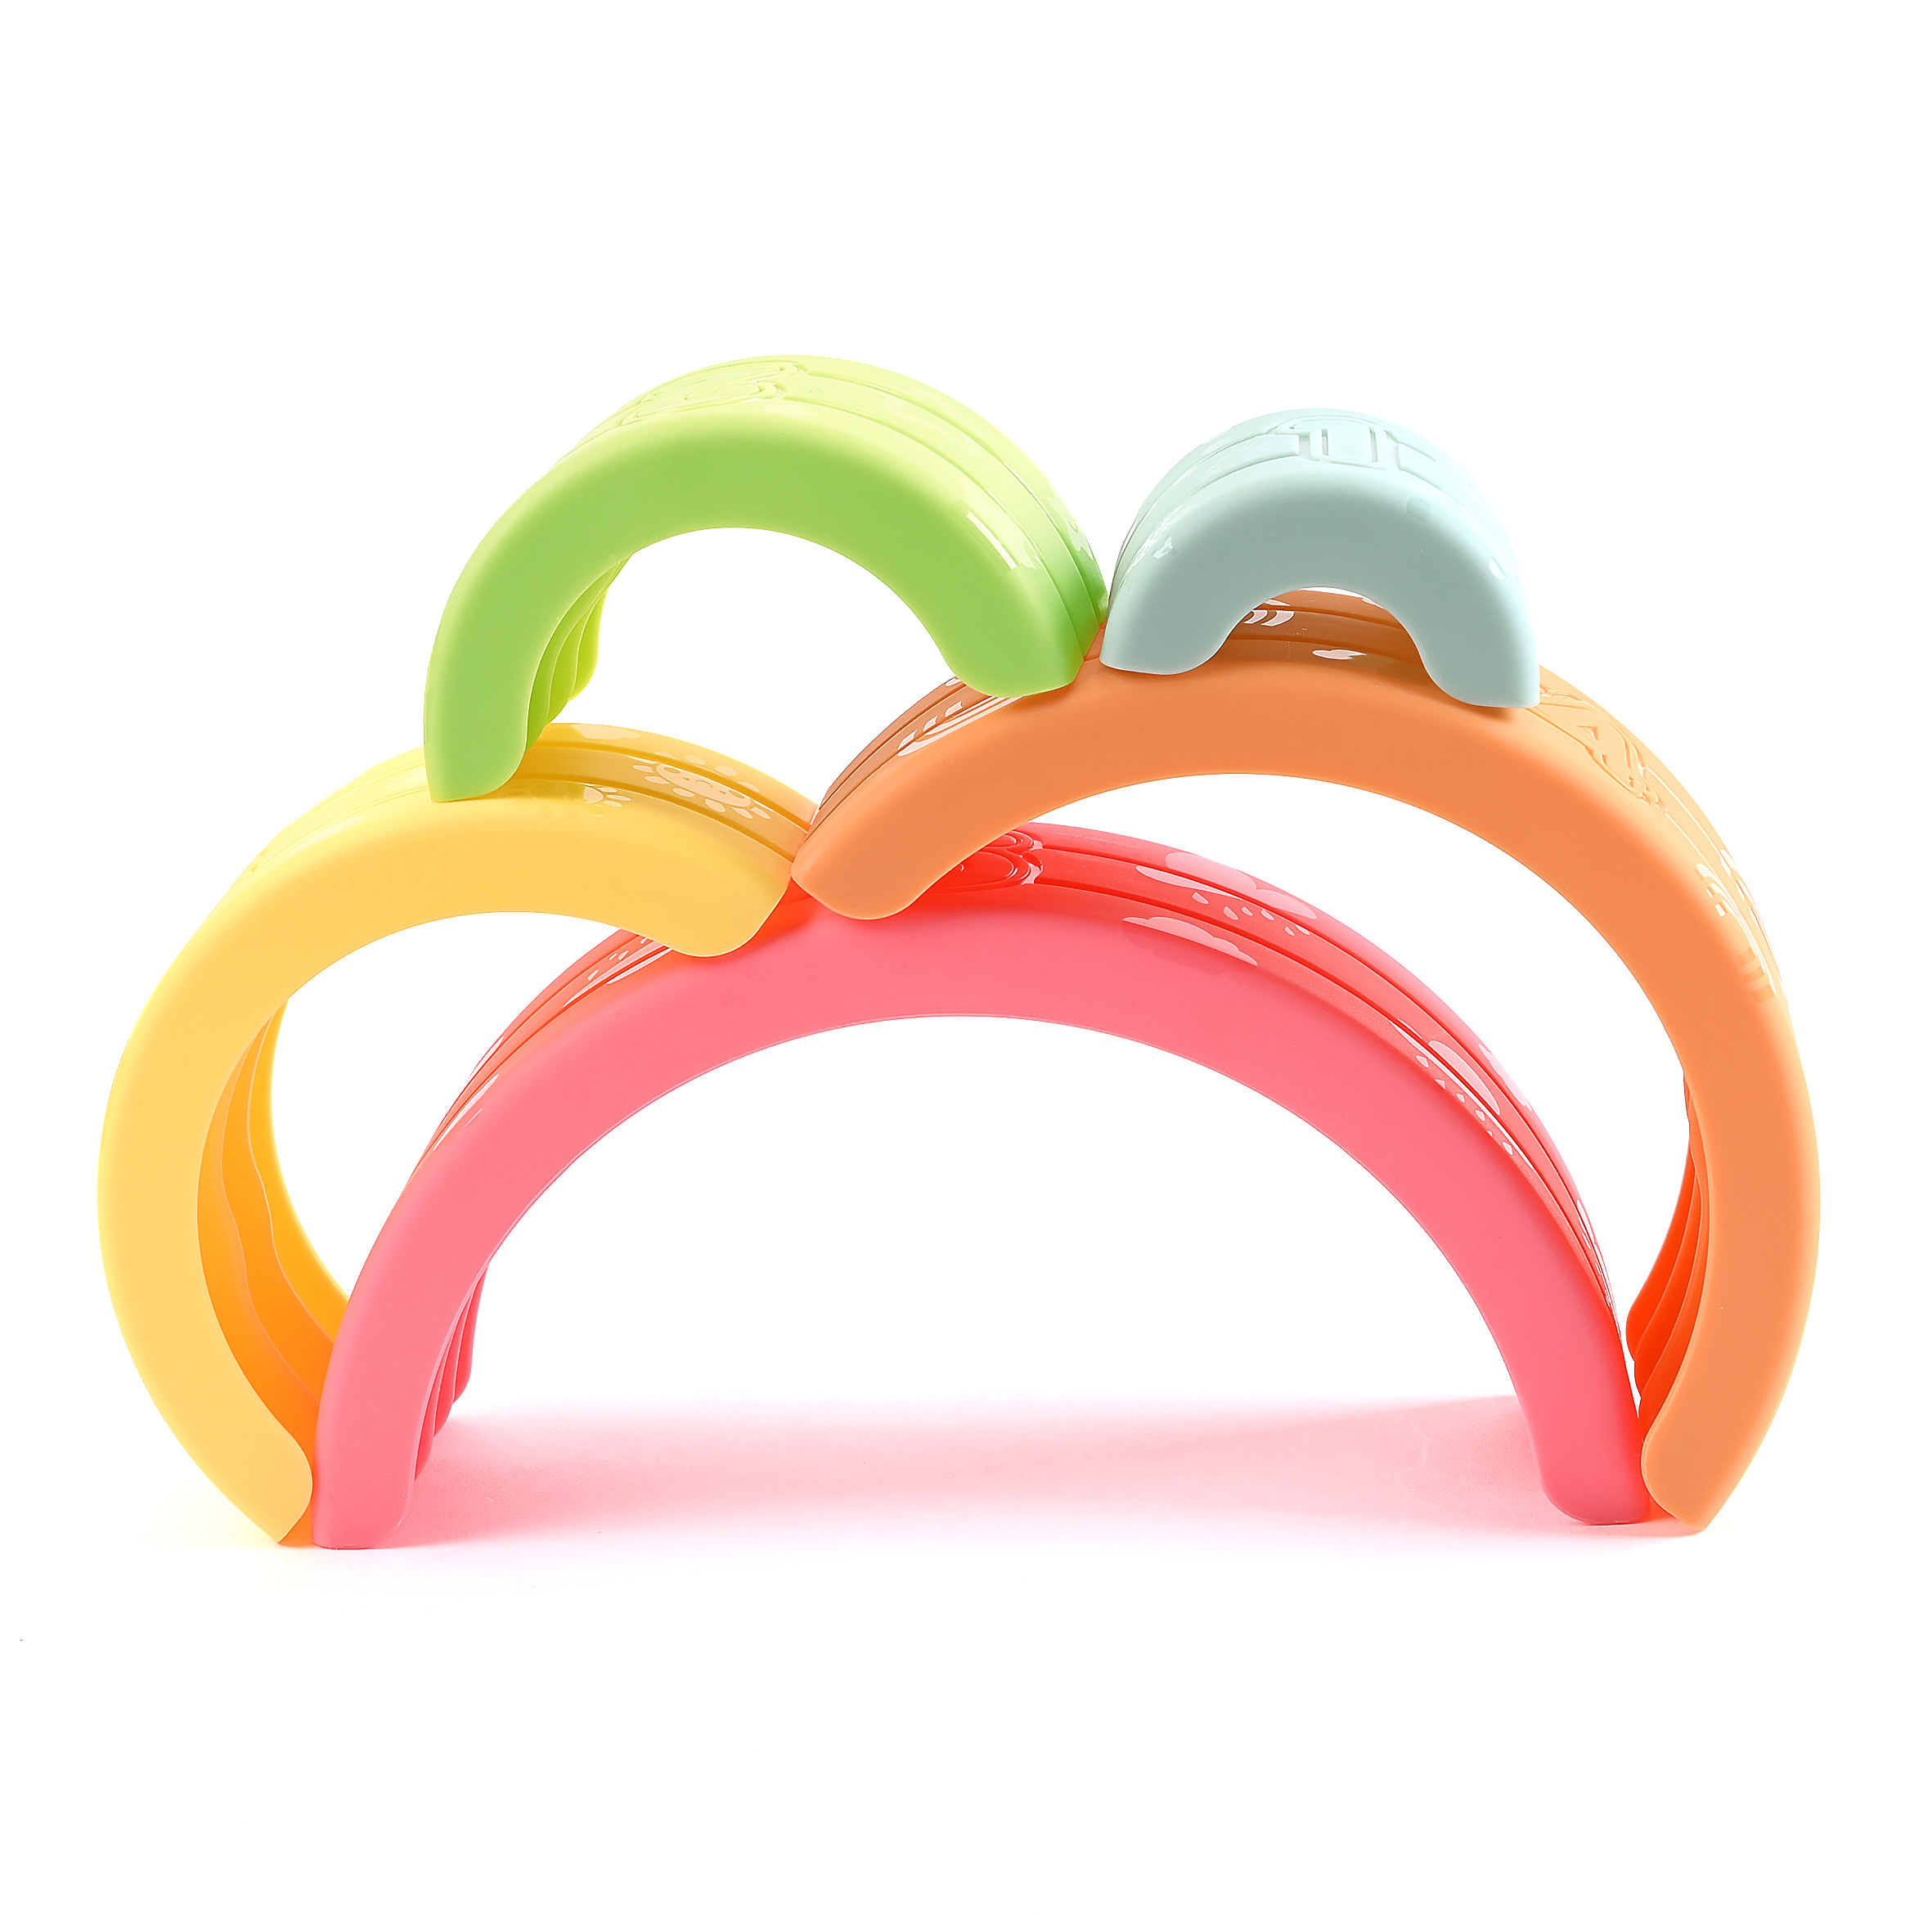 Spark Create Imagine 6-Piece Stacking Rainbow Cloud Toy, for Age Group 6m+, Plastic Toys - image 3 of 14